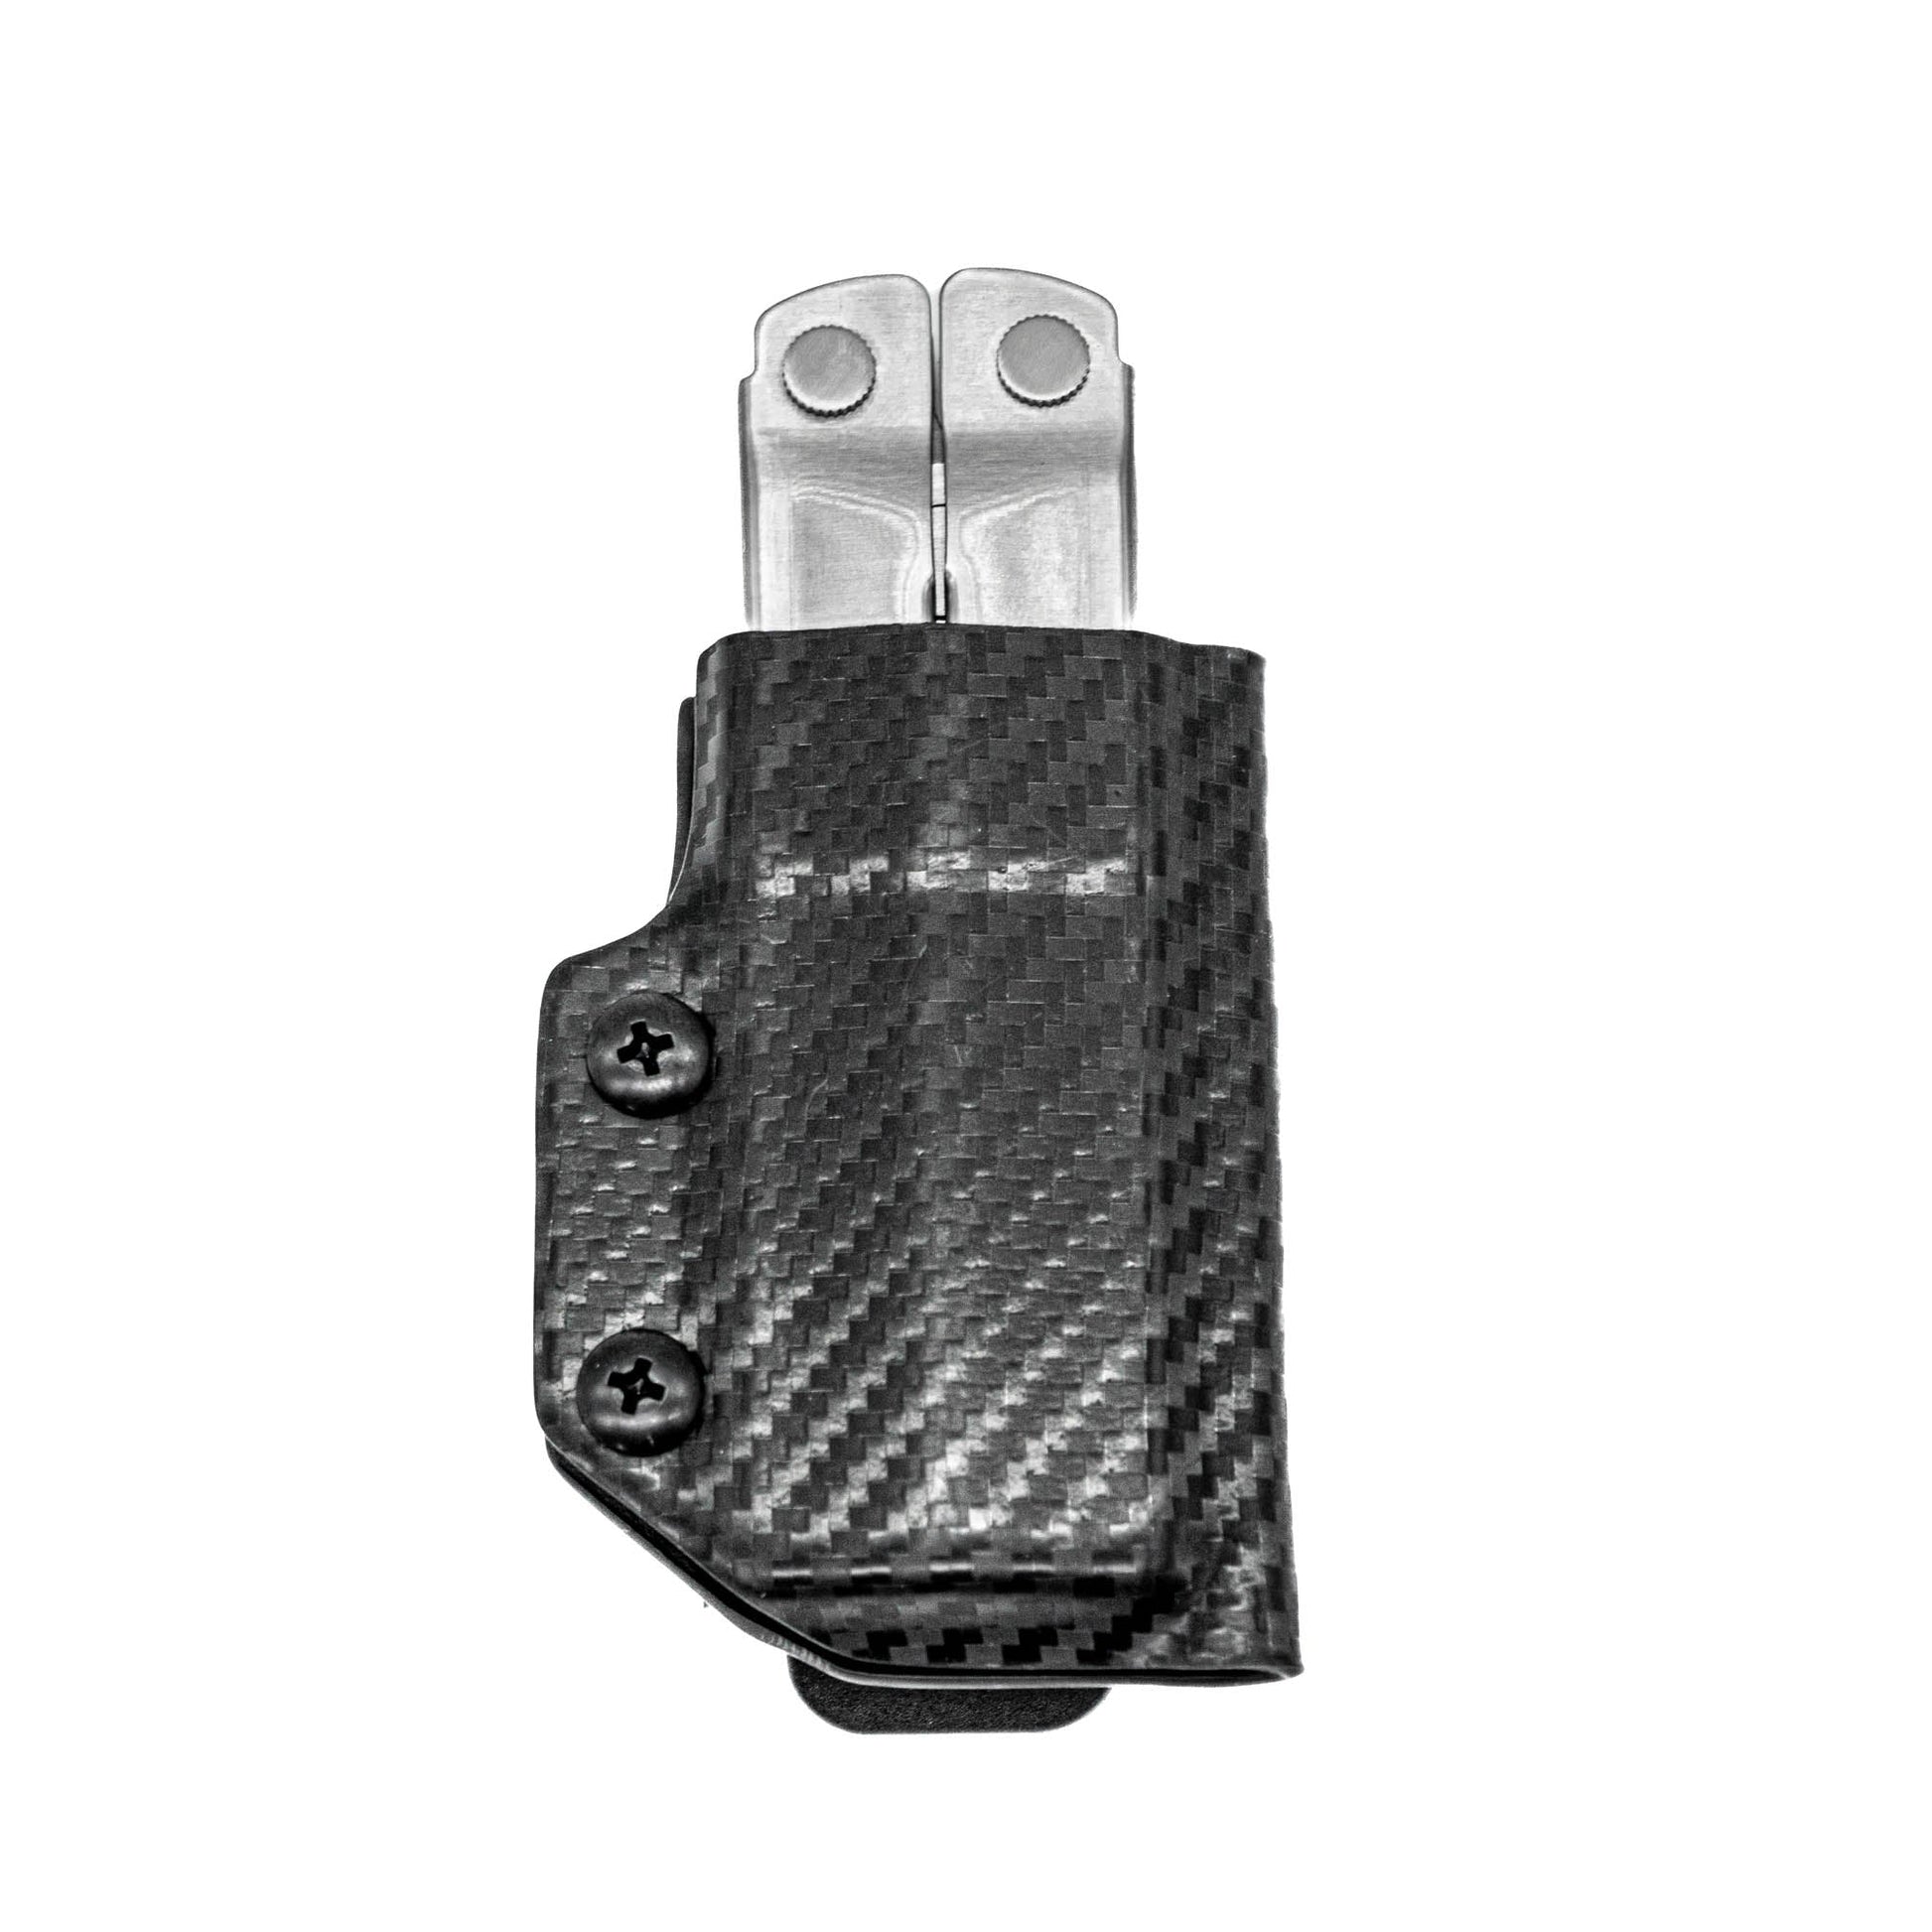 Kydex Sheath for the Leatherman Bond Clip & Carry